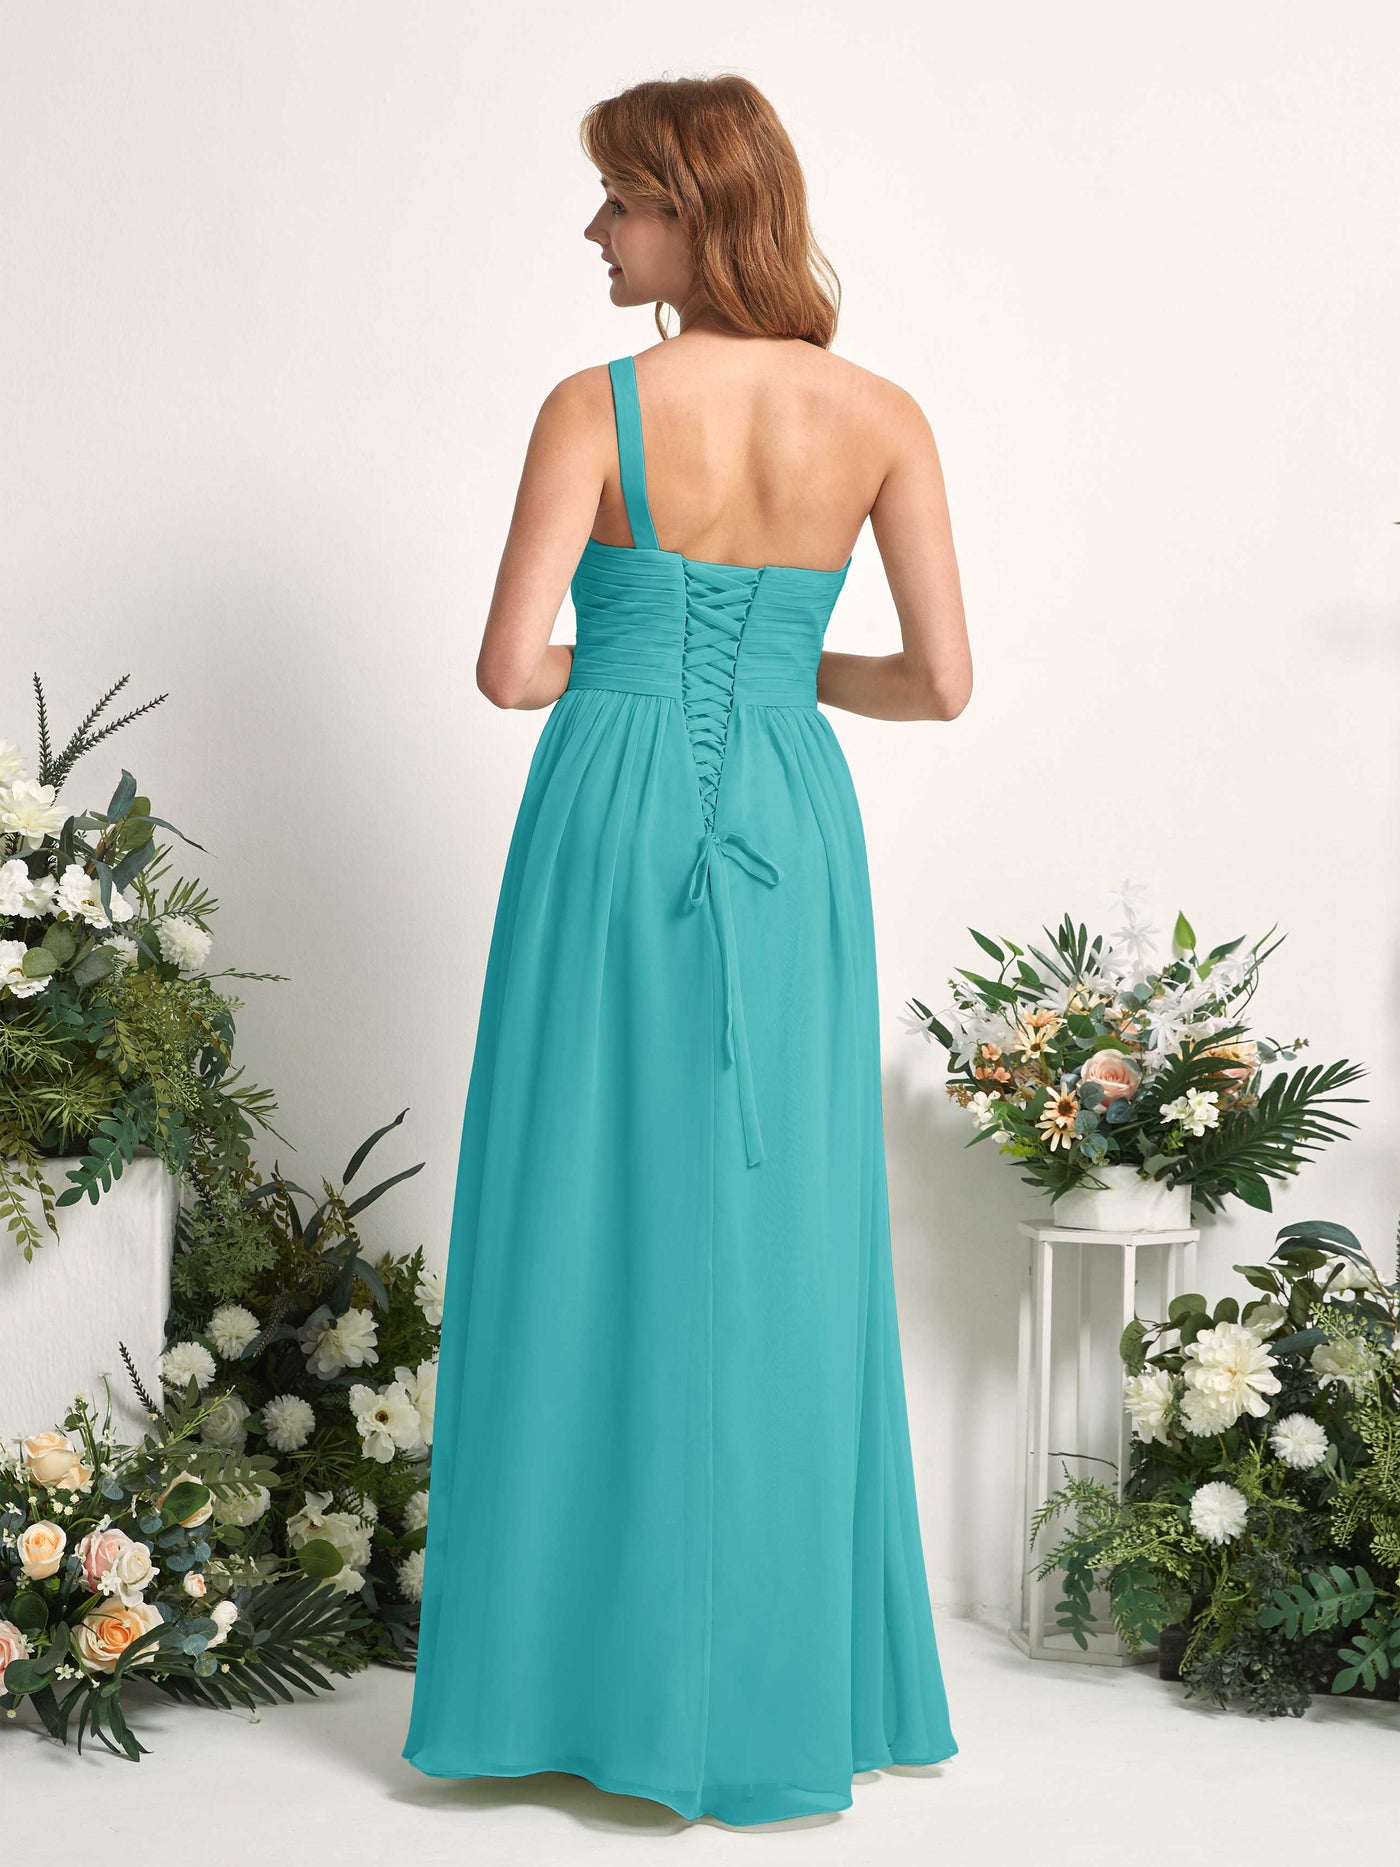 Bridesmaid Dress A-line Chiffon One Shoulder Full Length Sleeveless Wedding Party Dress - Turquoise (81226723)#color_turquoise